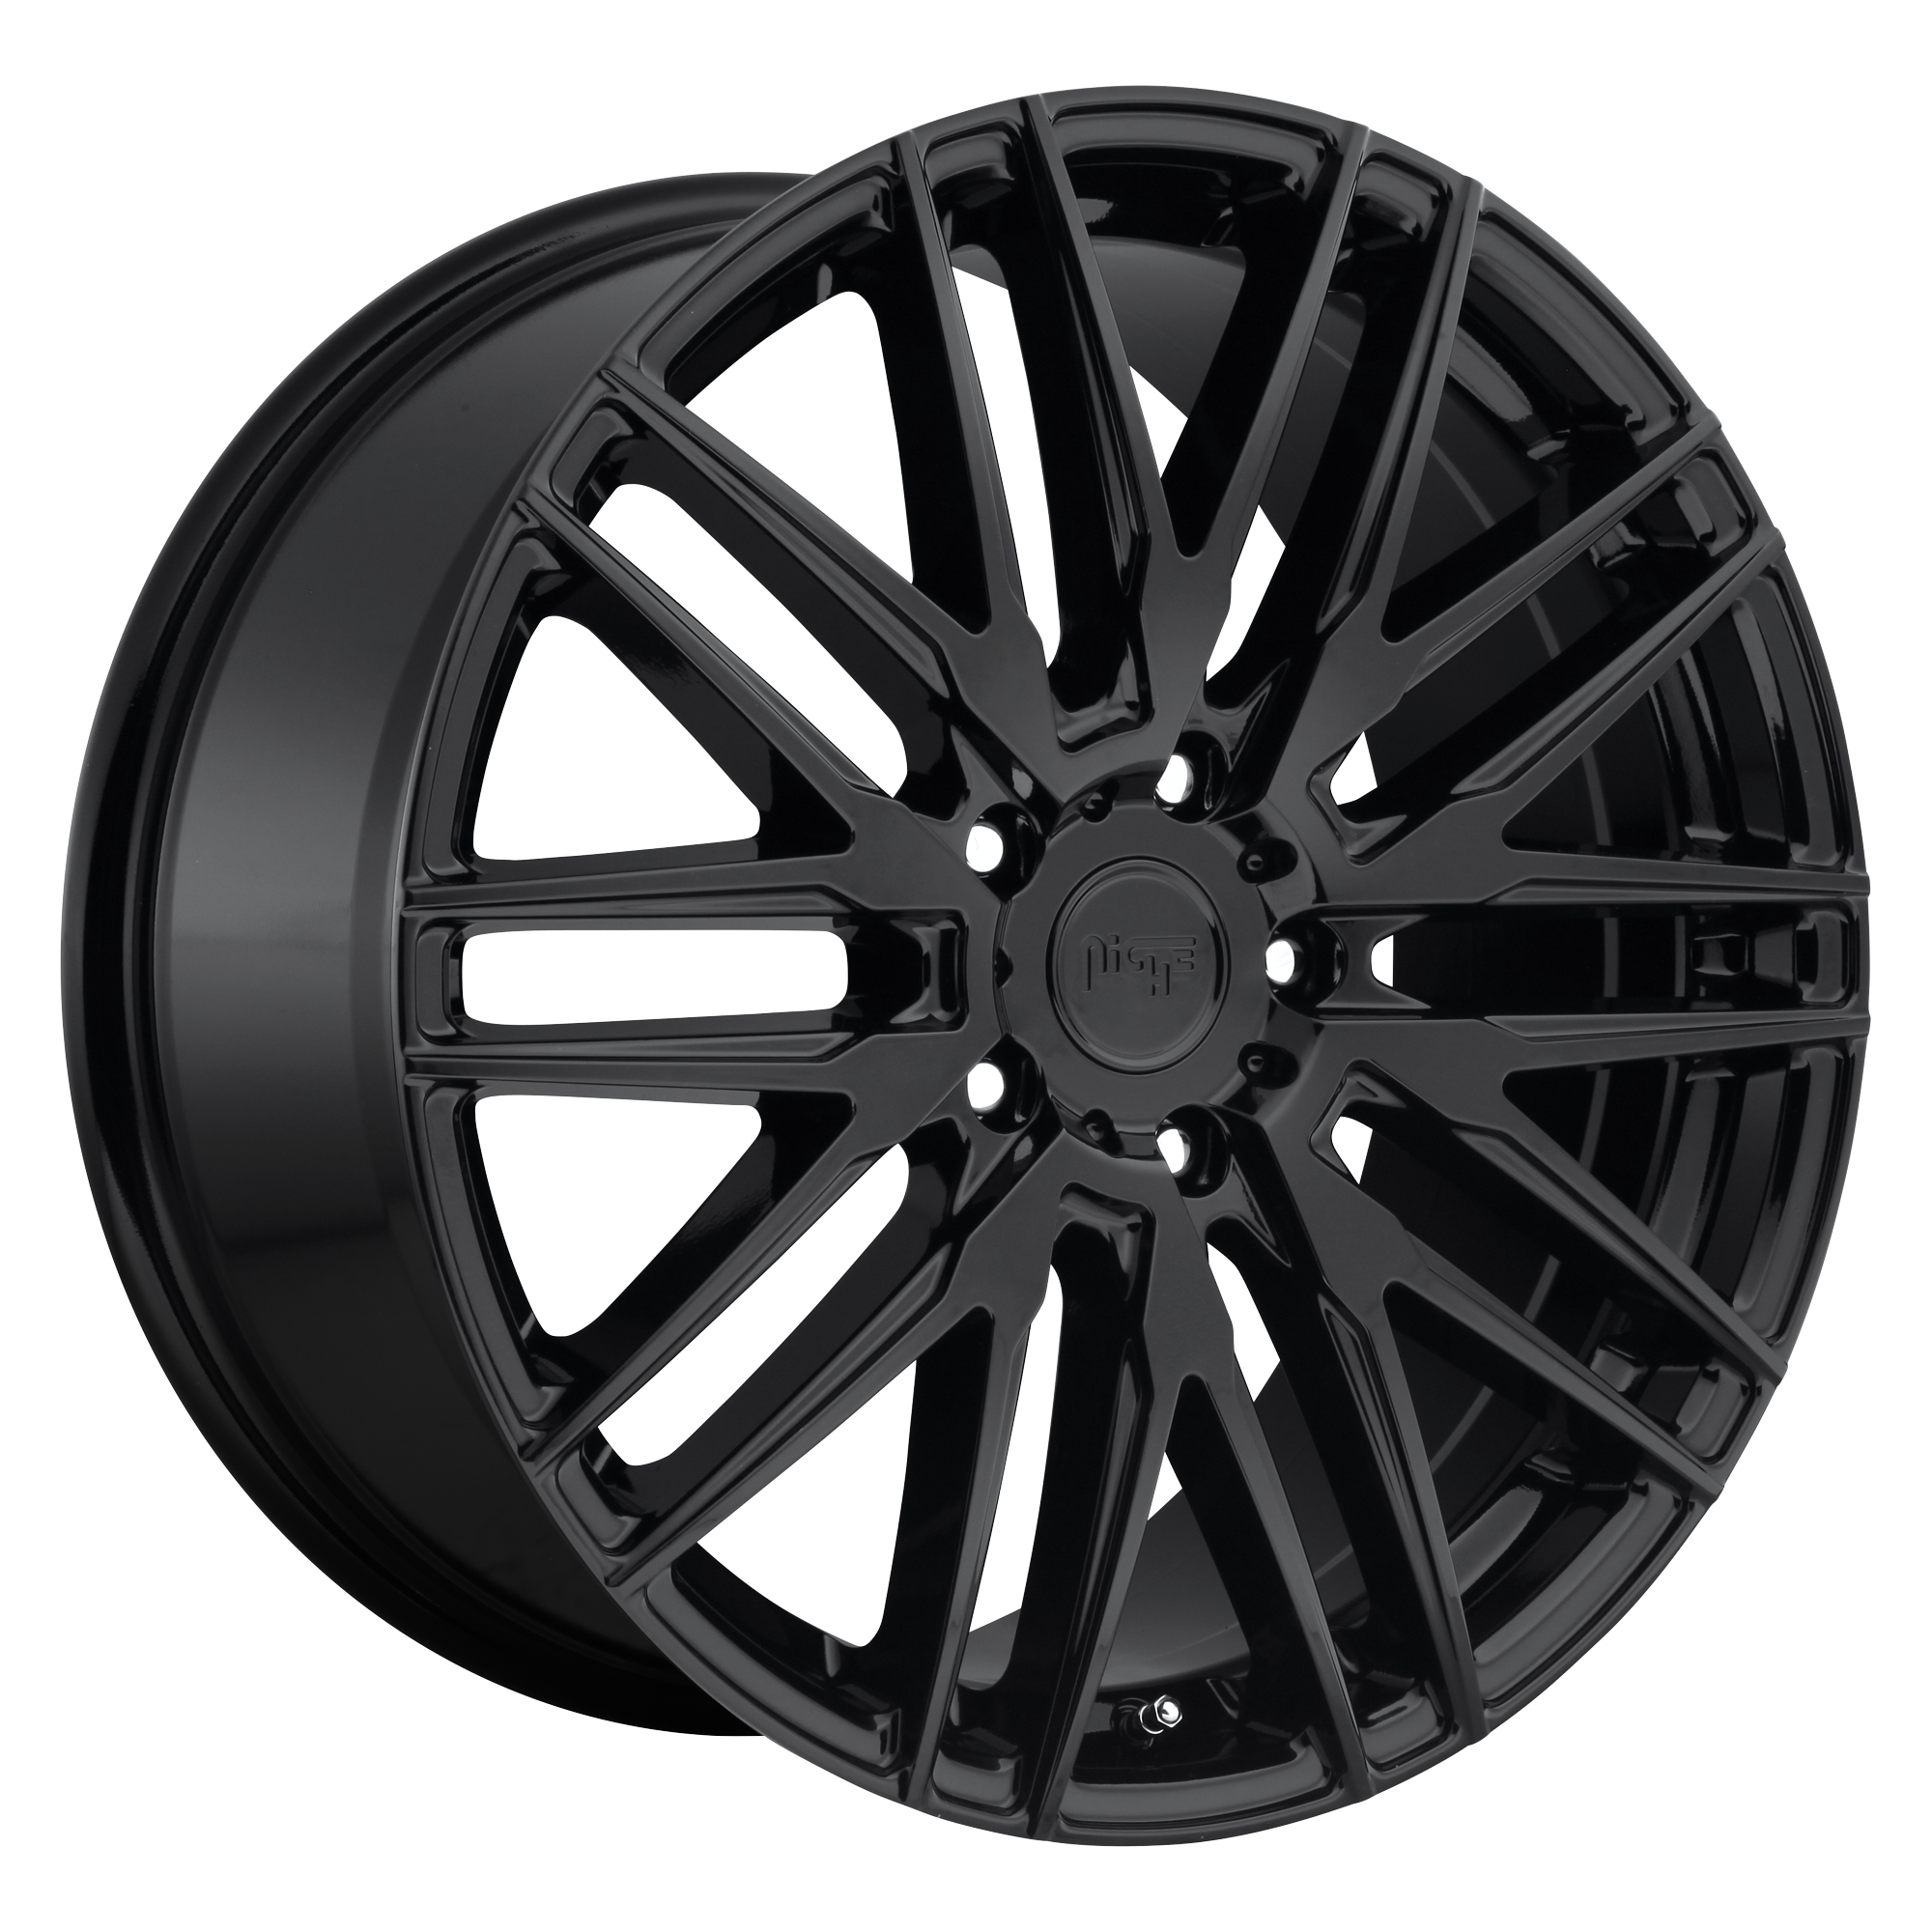 ANZIO 20x9 5x120.00 GLOSS BLACK (35 mm) - Tires and Engine Performance